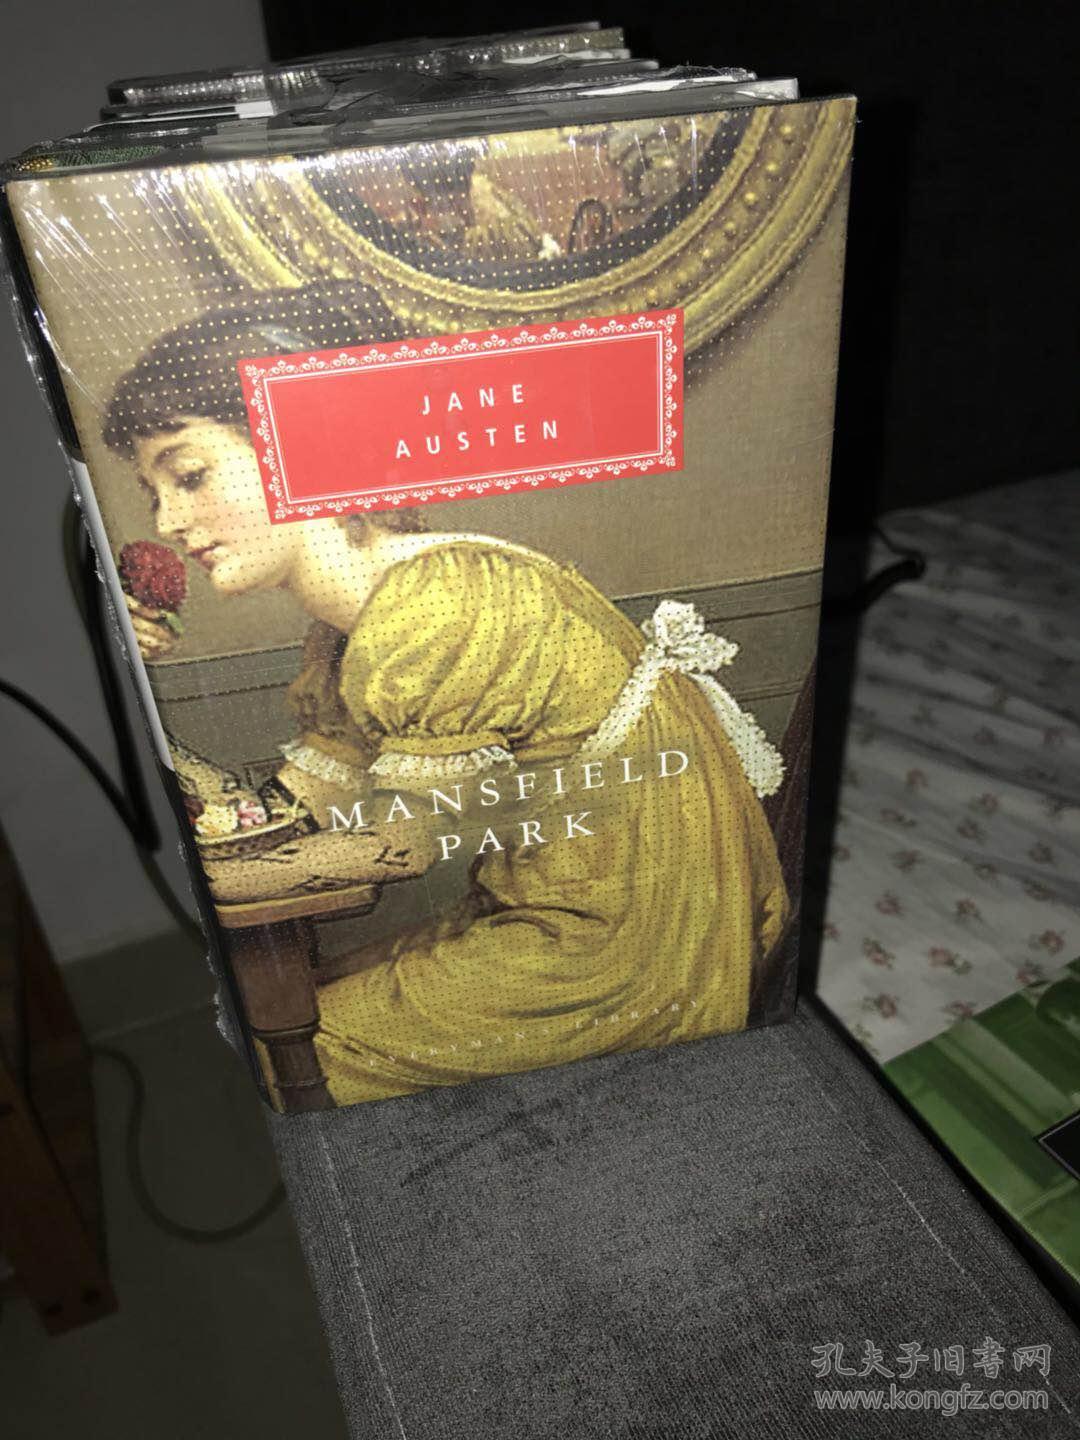 The Complete Novels of Jane Austen: Emma; Mansfield Park; Northanger Abbey; Persuasion; Pride and Prejudice; Sanditon and Other Stories; Sense and Sensibility (英语) 精装